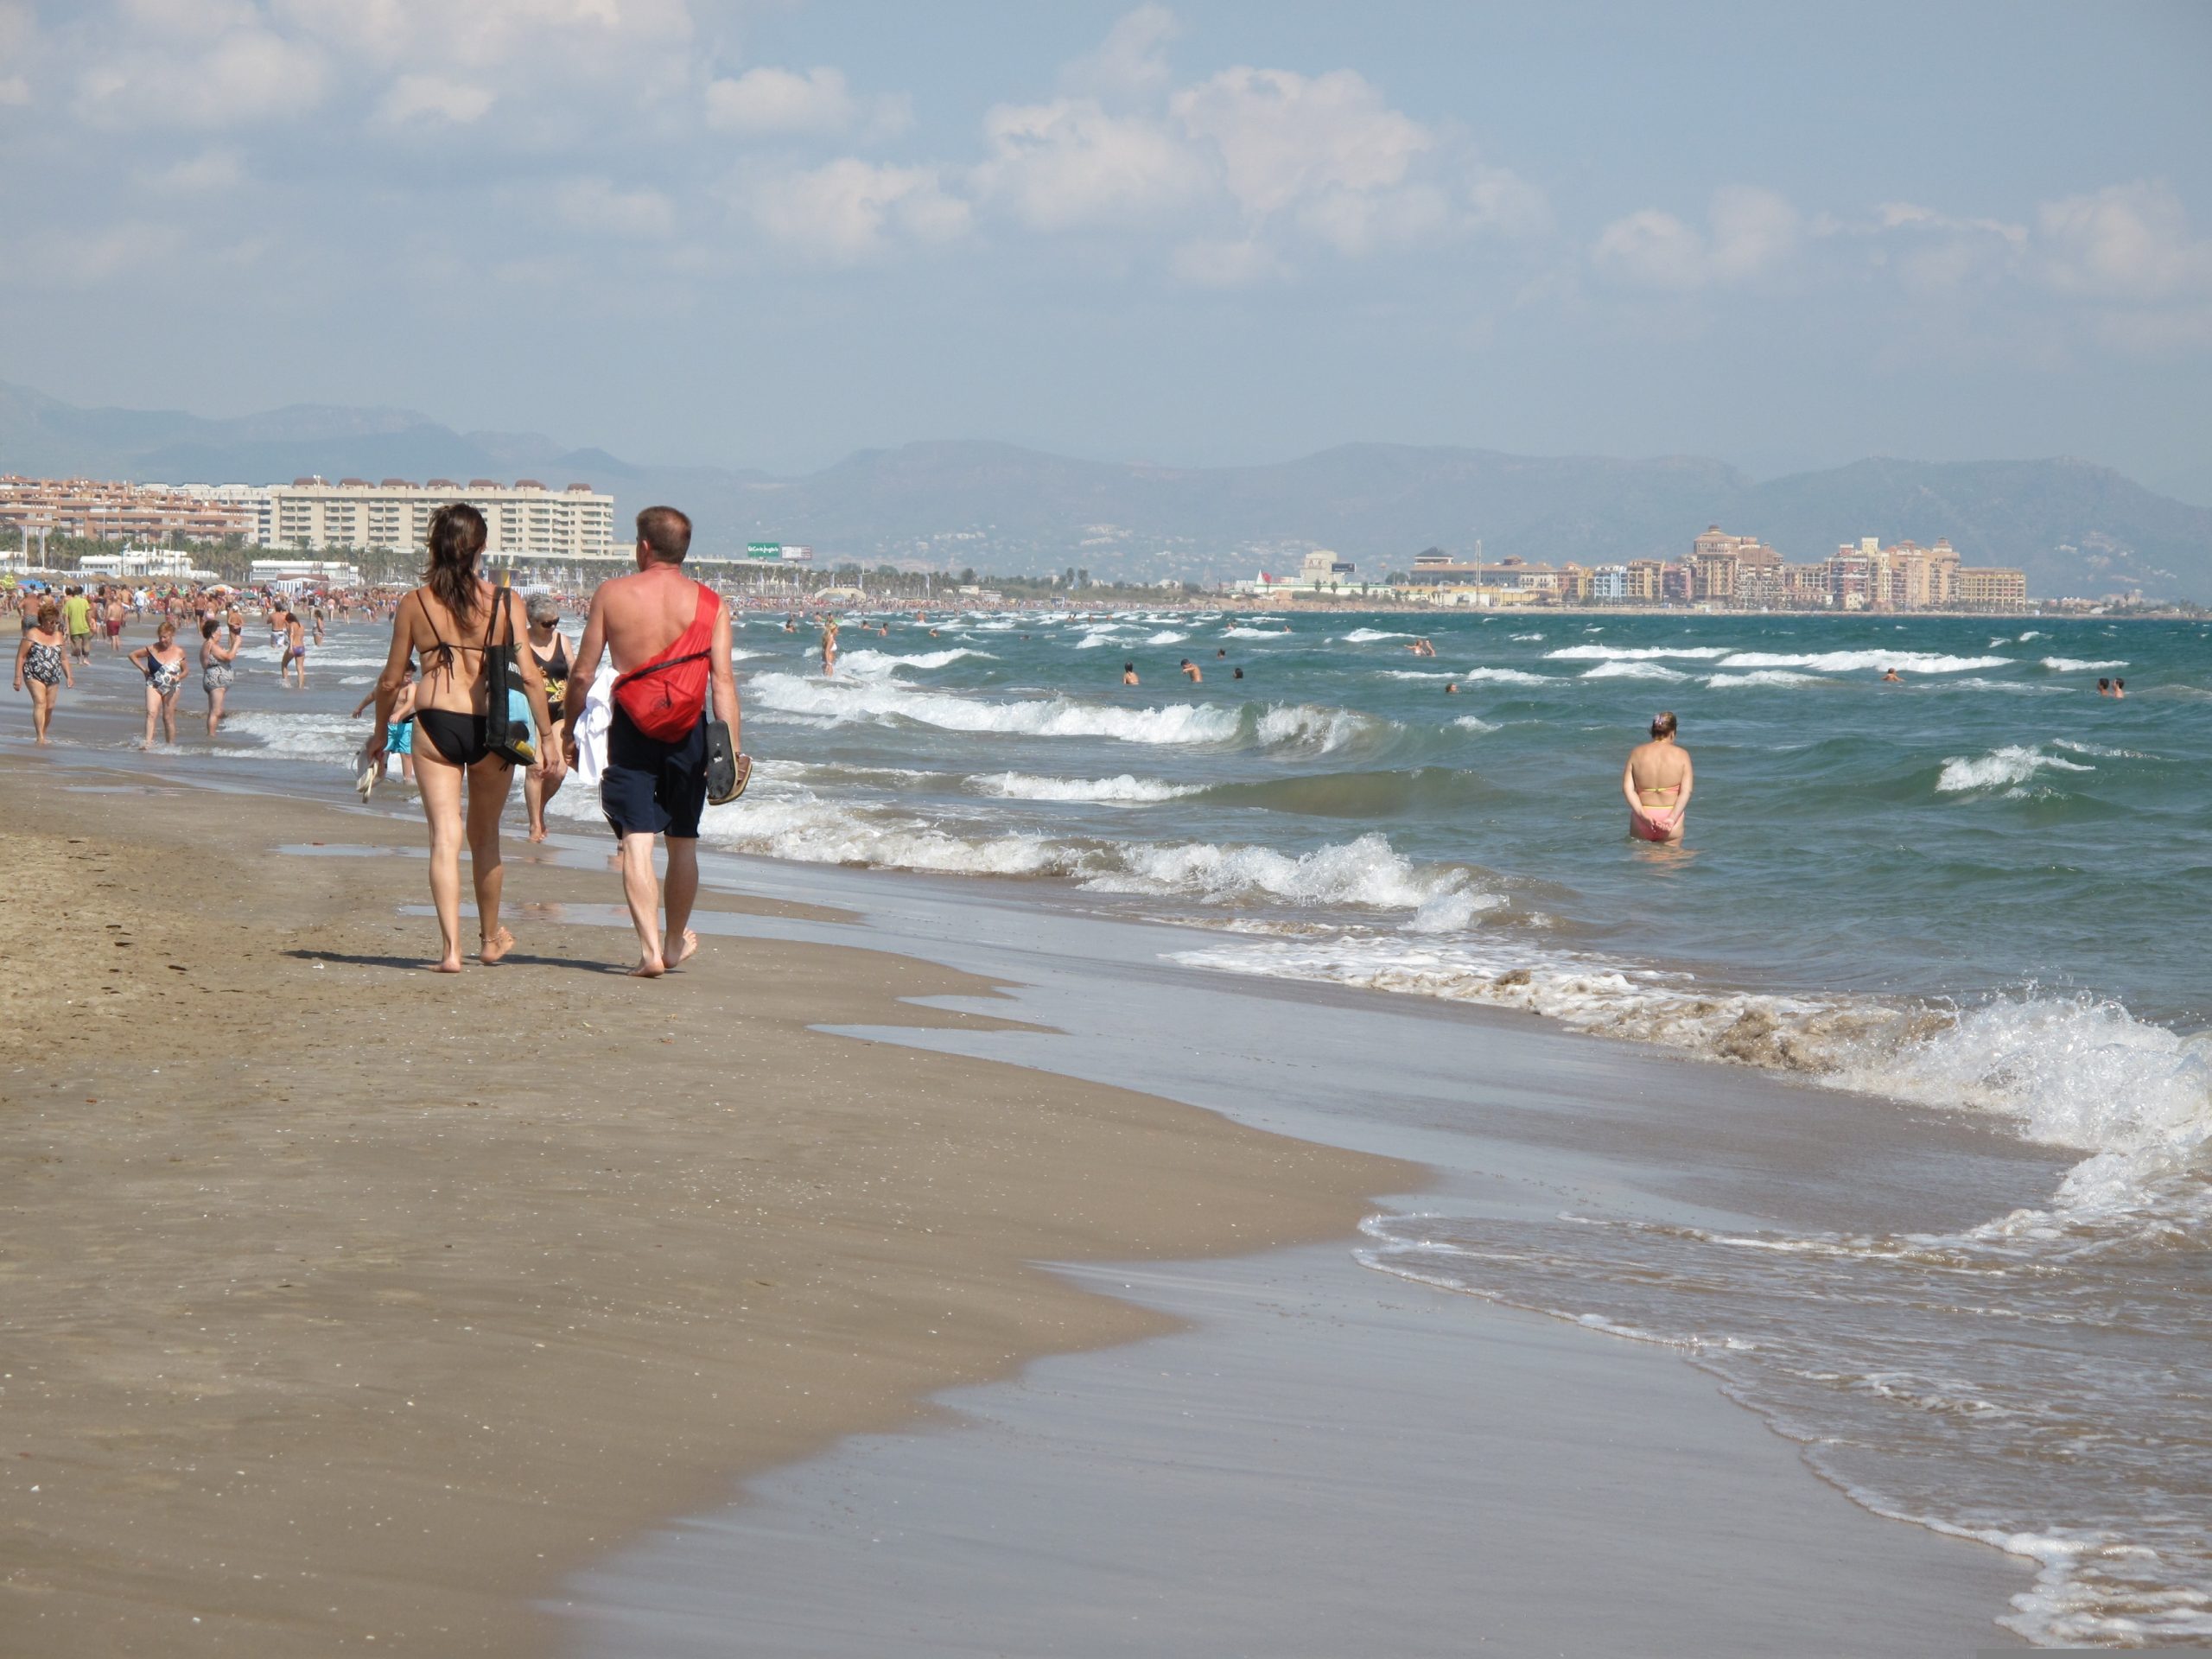 British and other foreign tourists spent a record-breaking €1.6billion across Spain's Valencia region this August